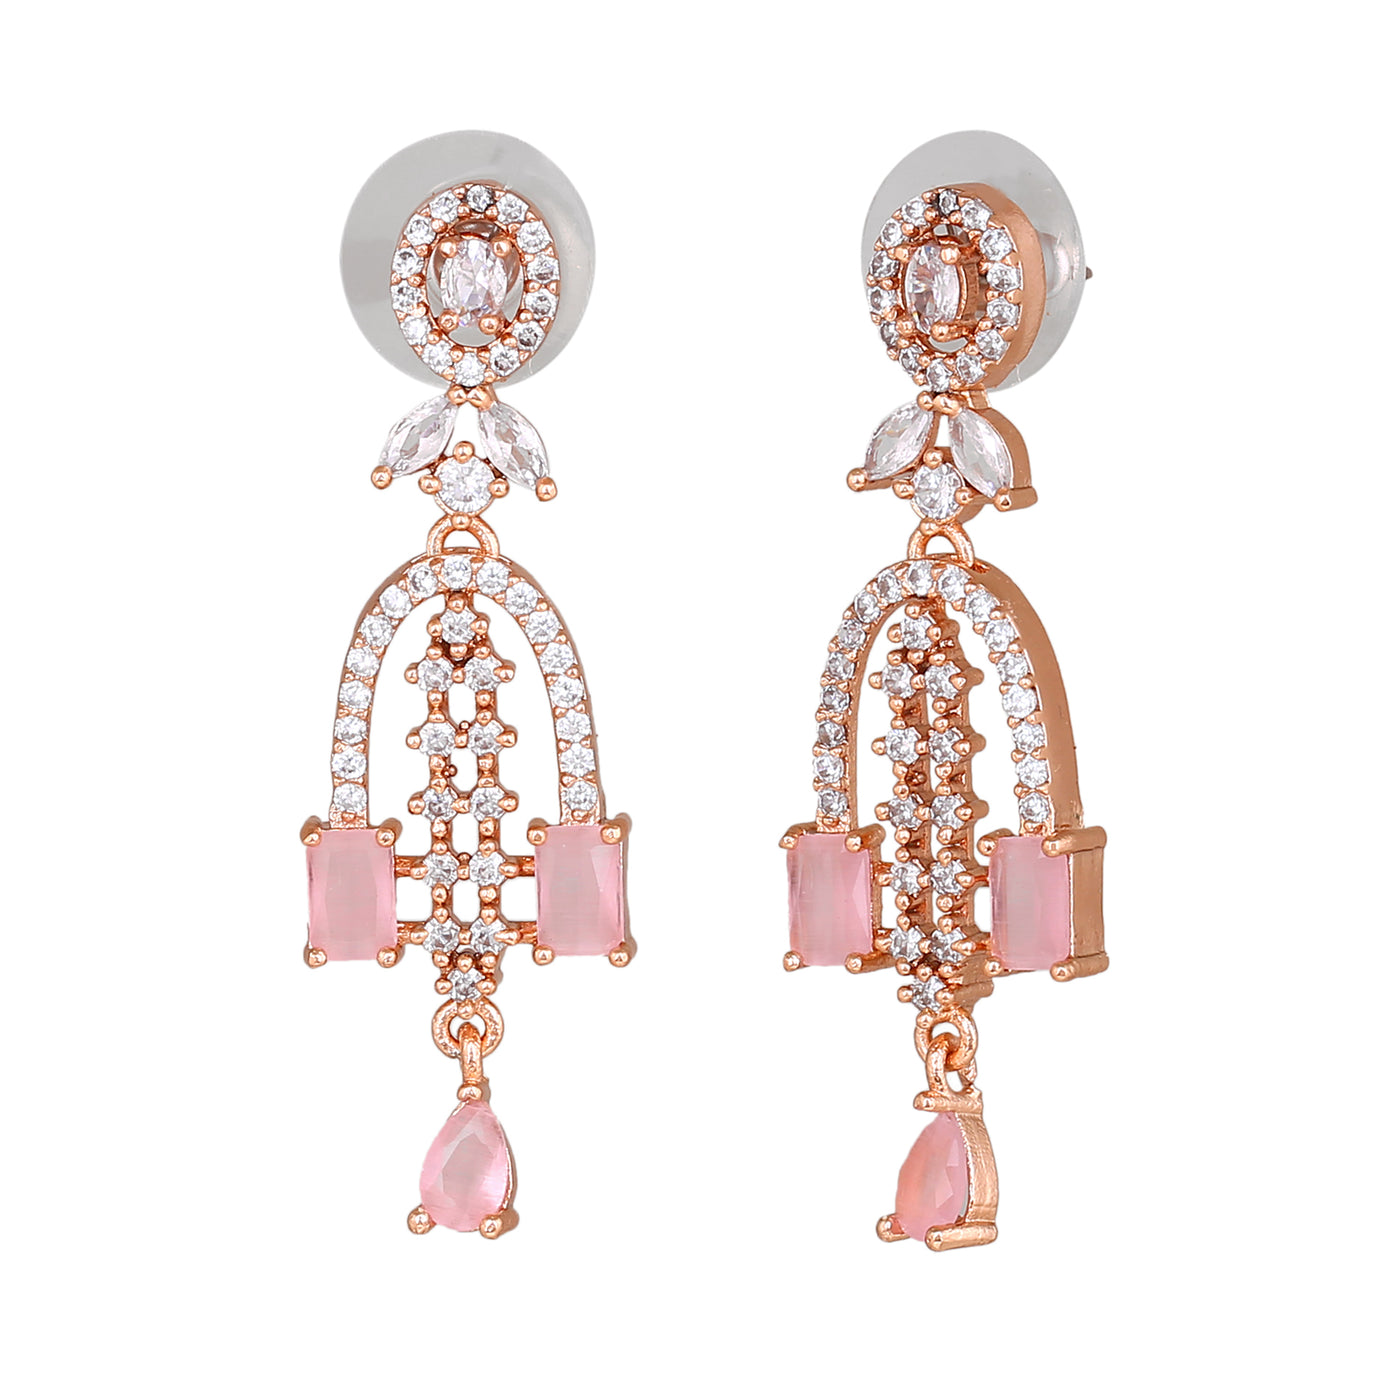 Estele Rose Gold Plated CZ Falling Star Designer Earrings with Mint Pink Stones for Women